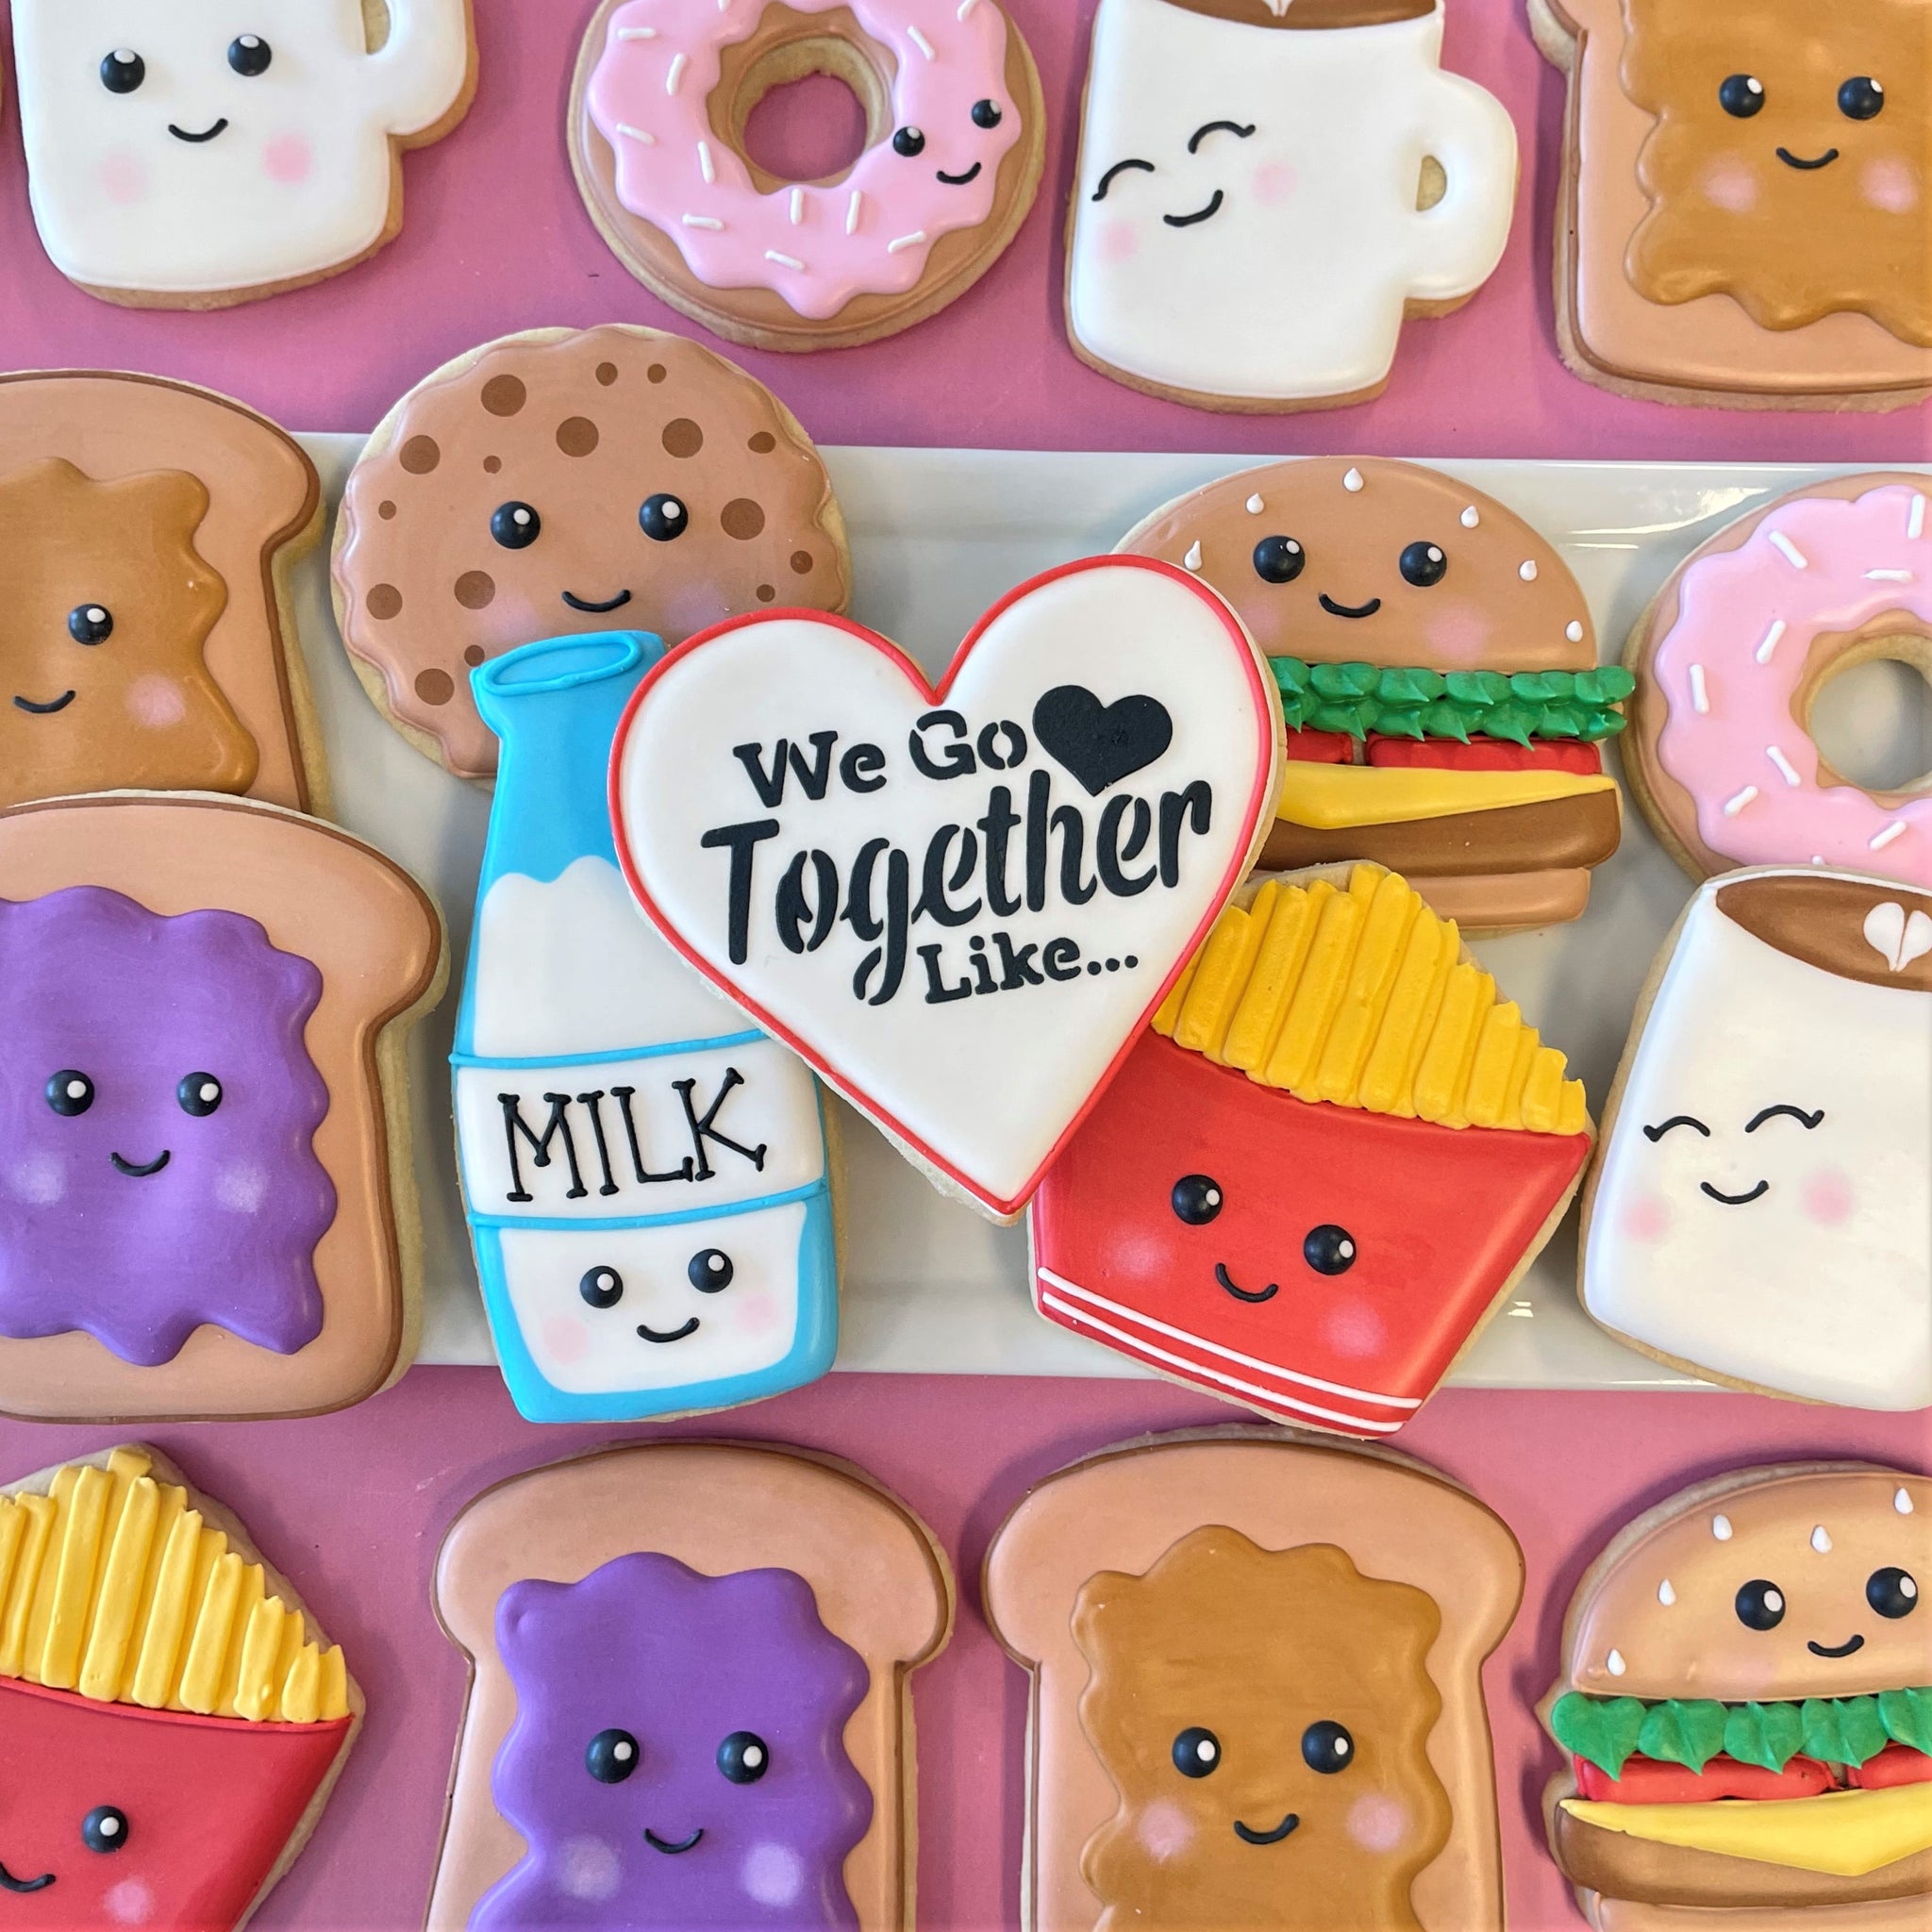 We Go Together Like... Cookie Decorating Kit